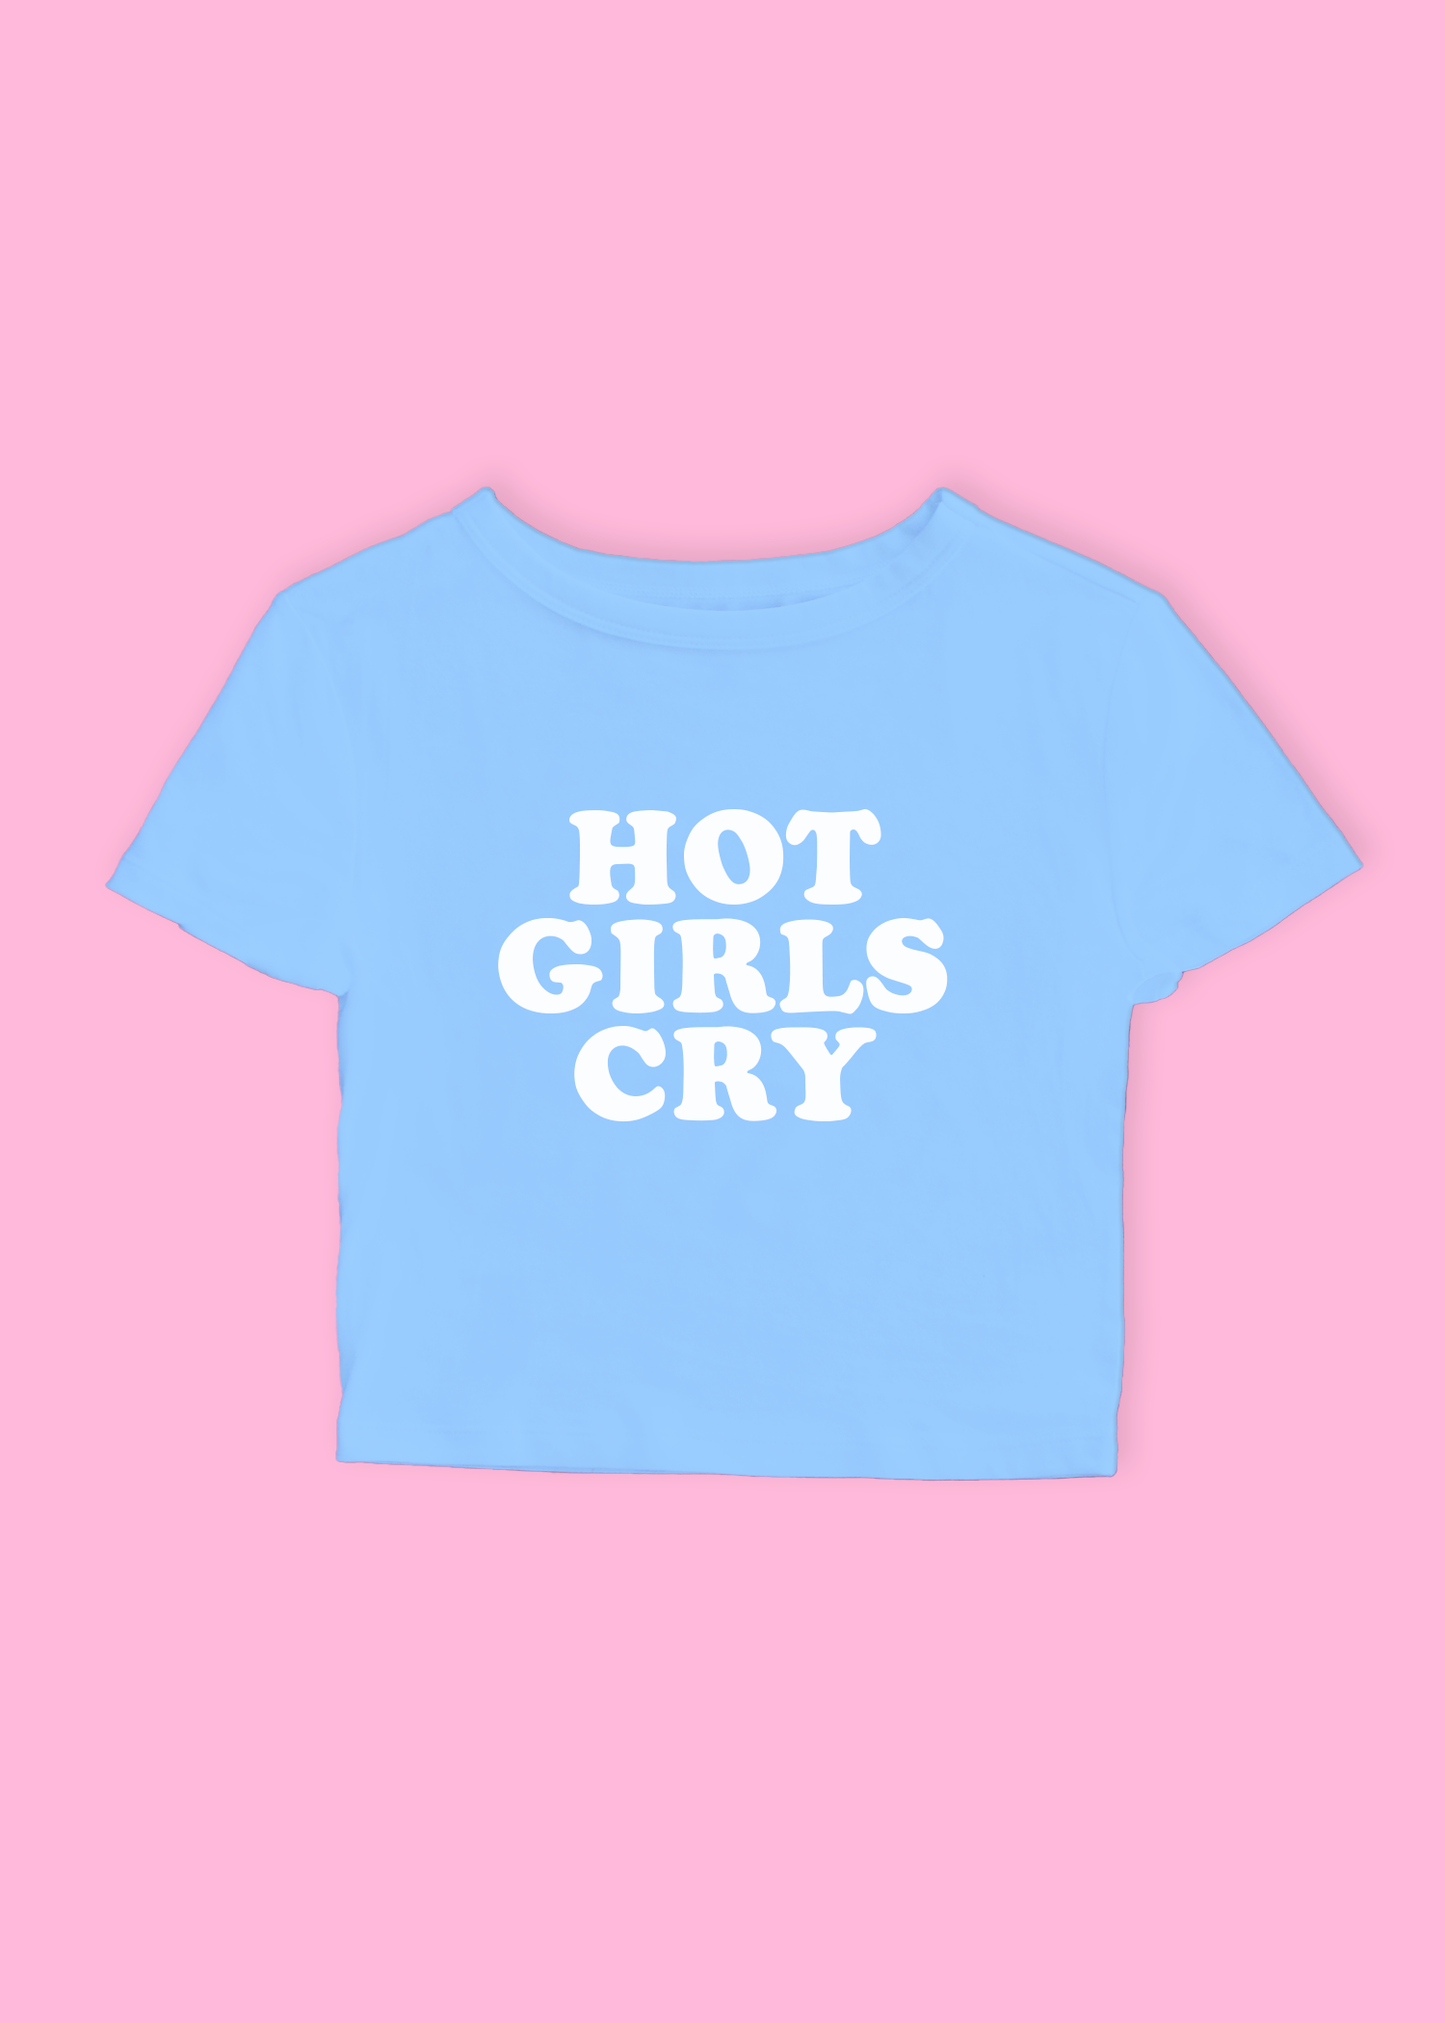 HOT GIRLS CRY